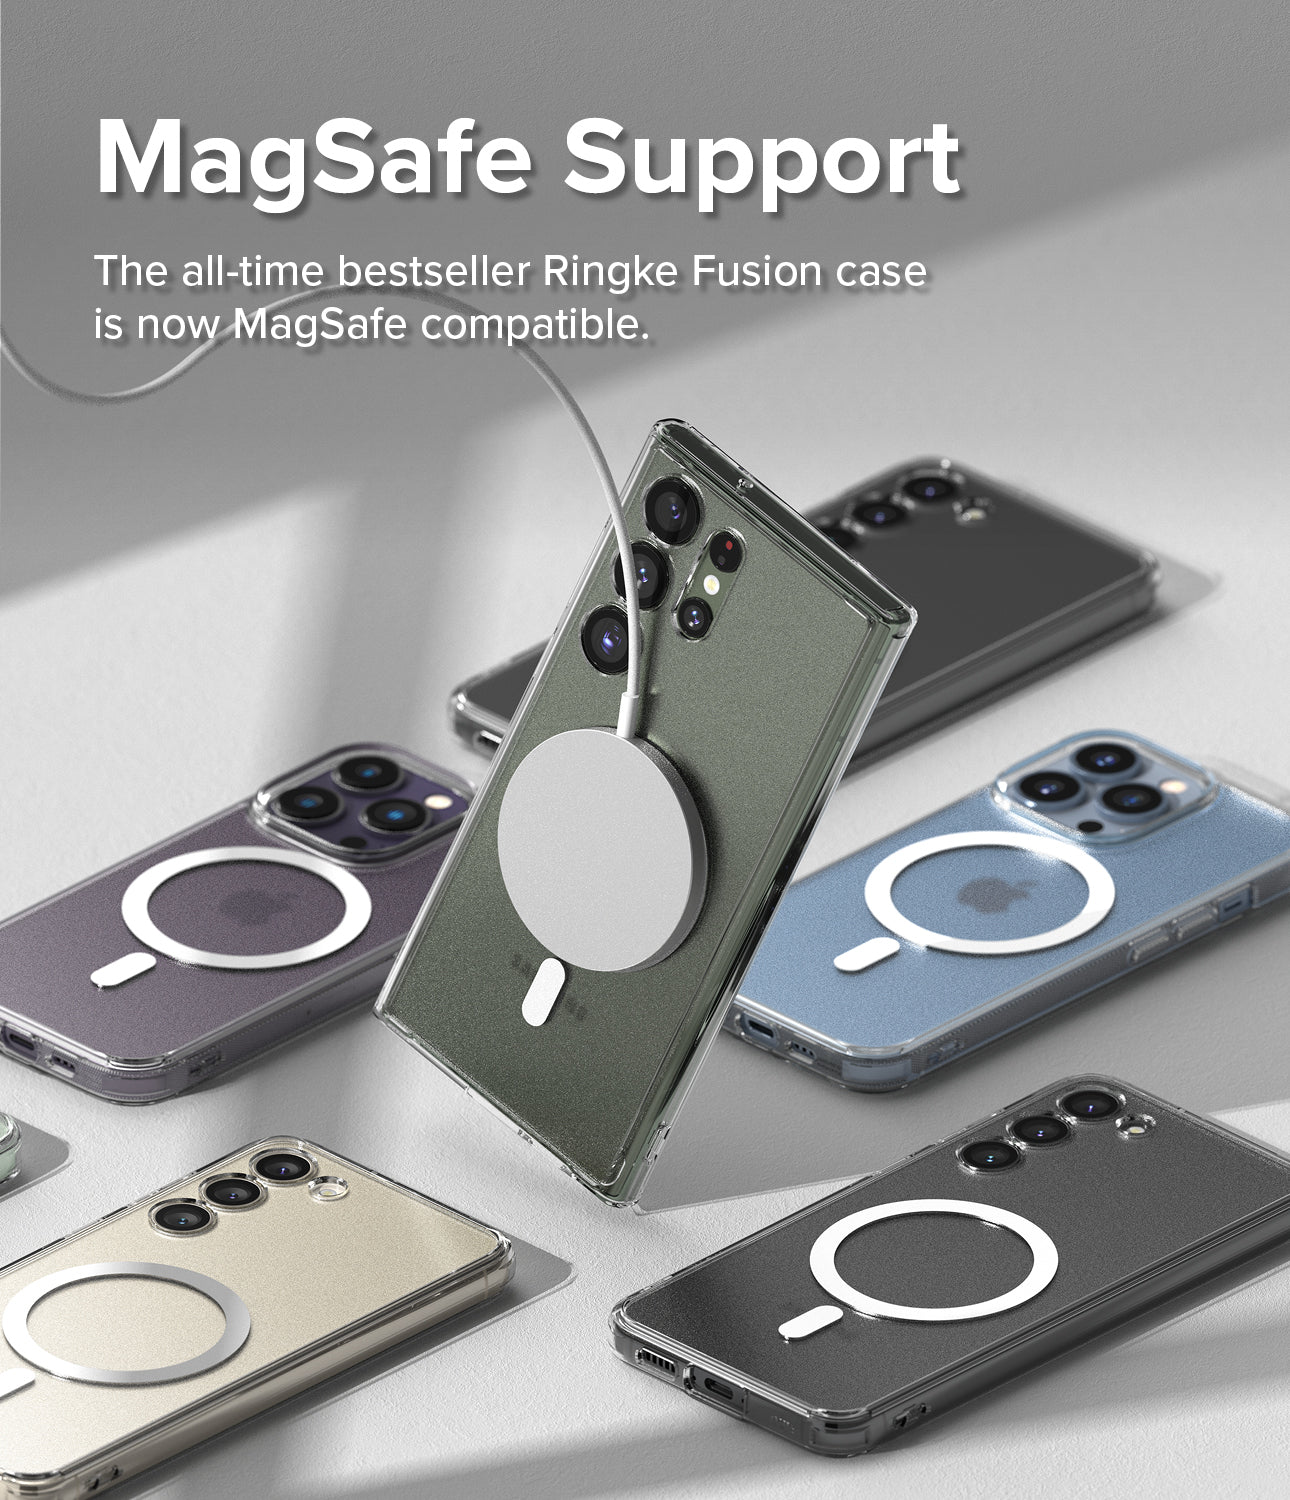 MagSafe Support l The all-time bestseller Ringke Fusion case is now MagSafe compatible.